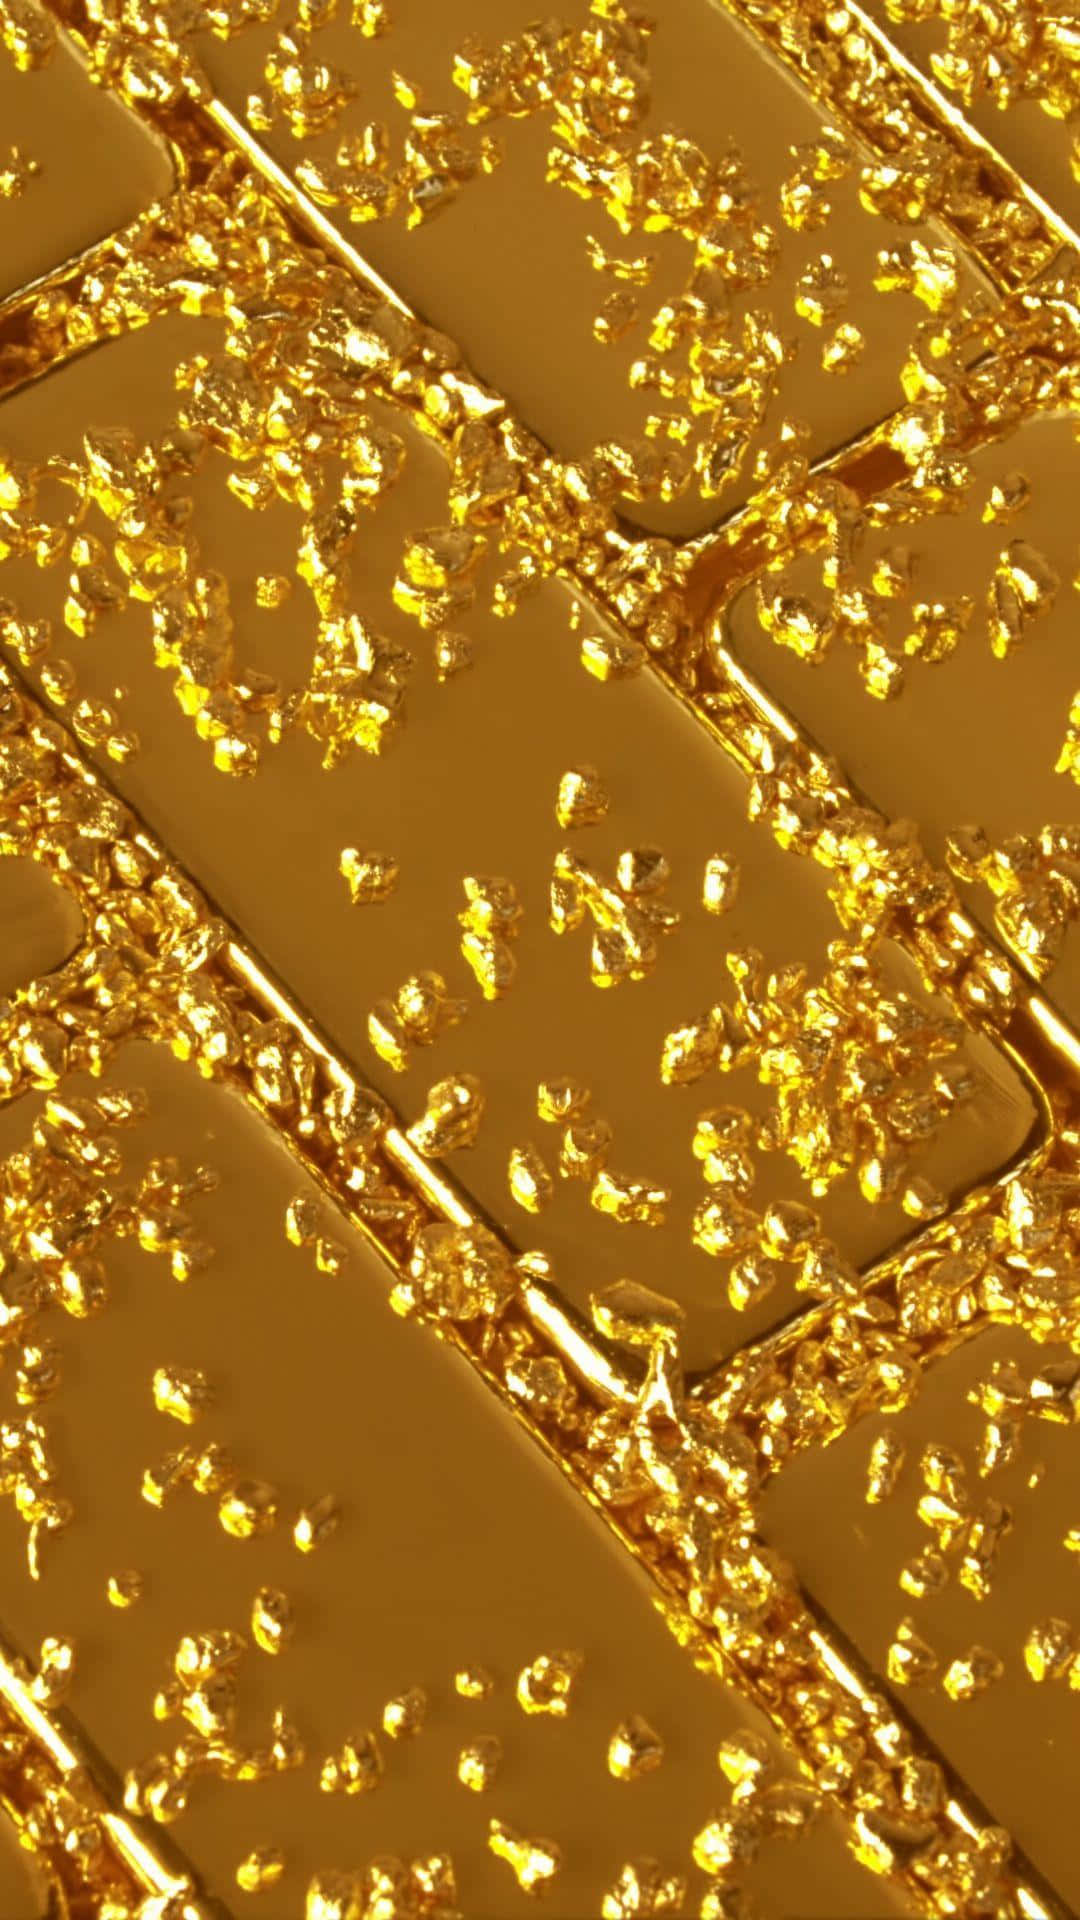 Unbox a stunning gold iPhone and keep the gold-themed glamour going. Wallpaper